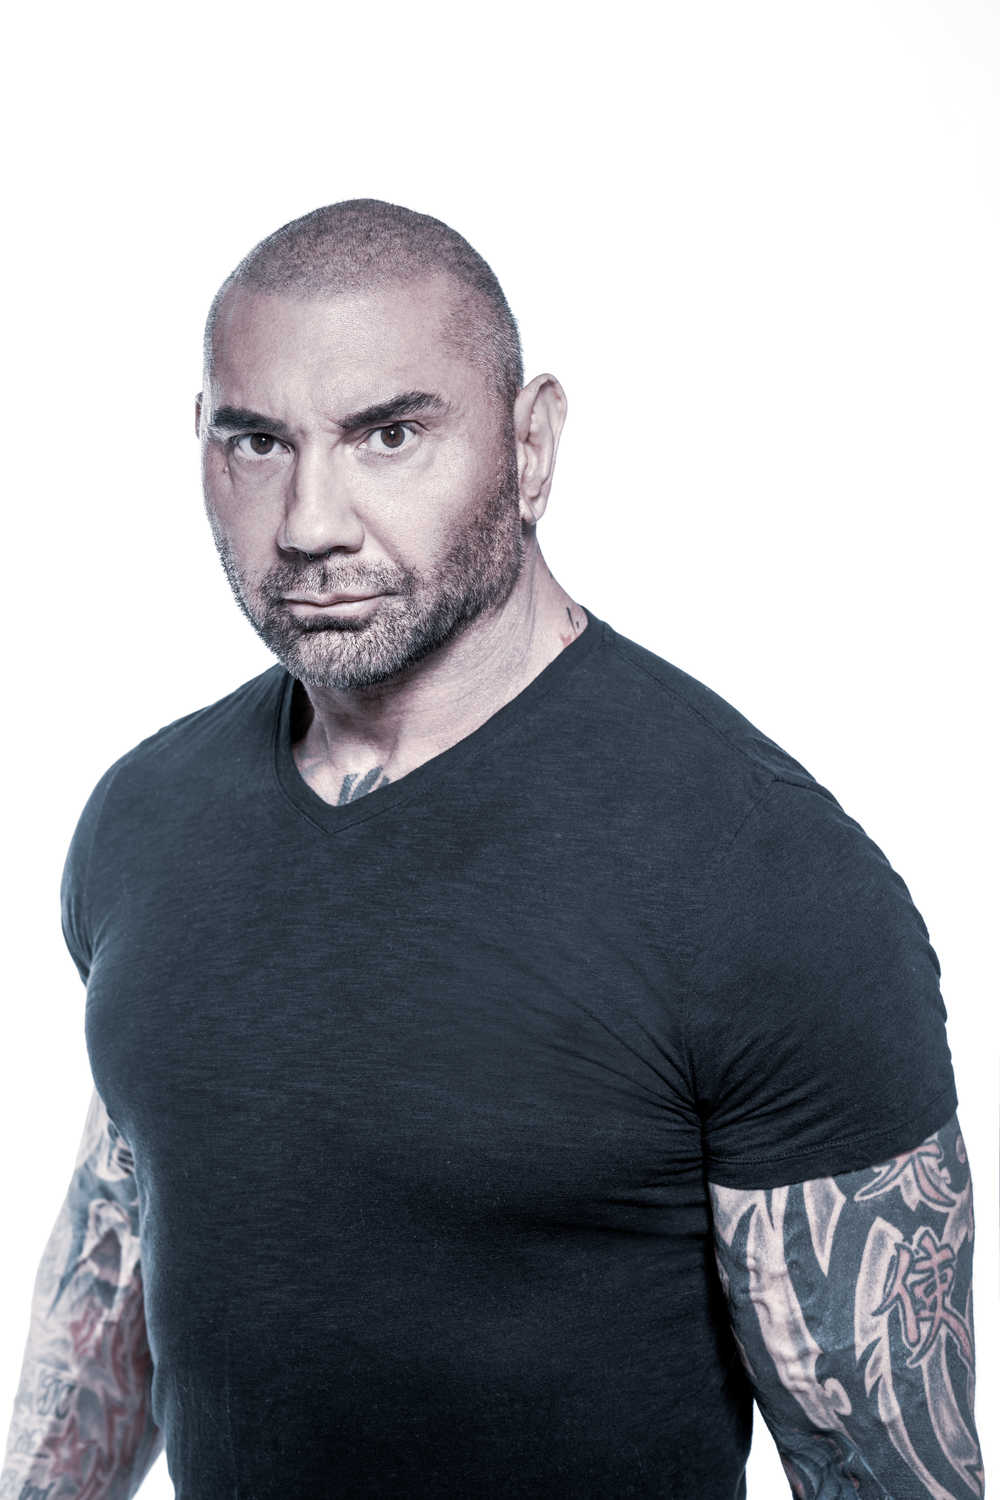 Dave Bautista Inspired Workout Program: Train Like Drax the Destroyer